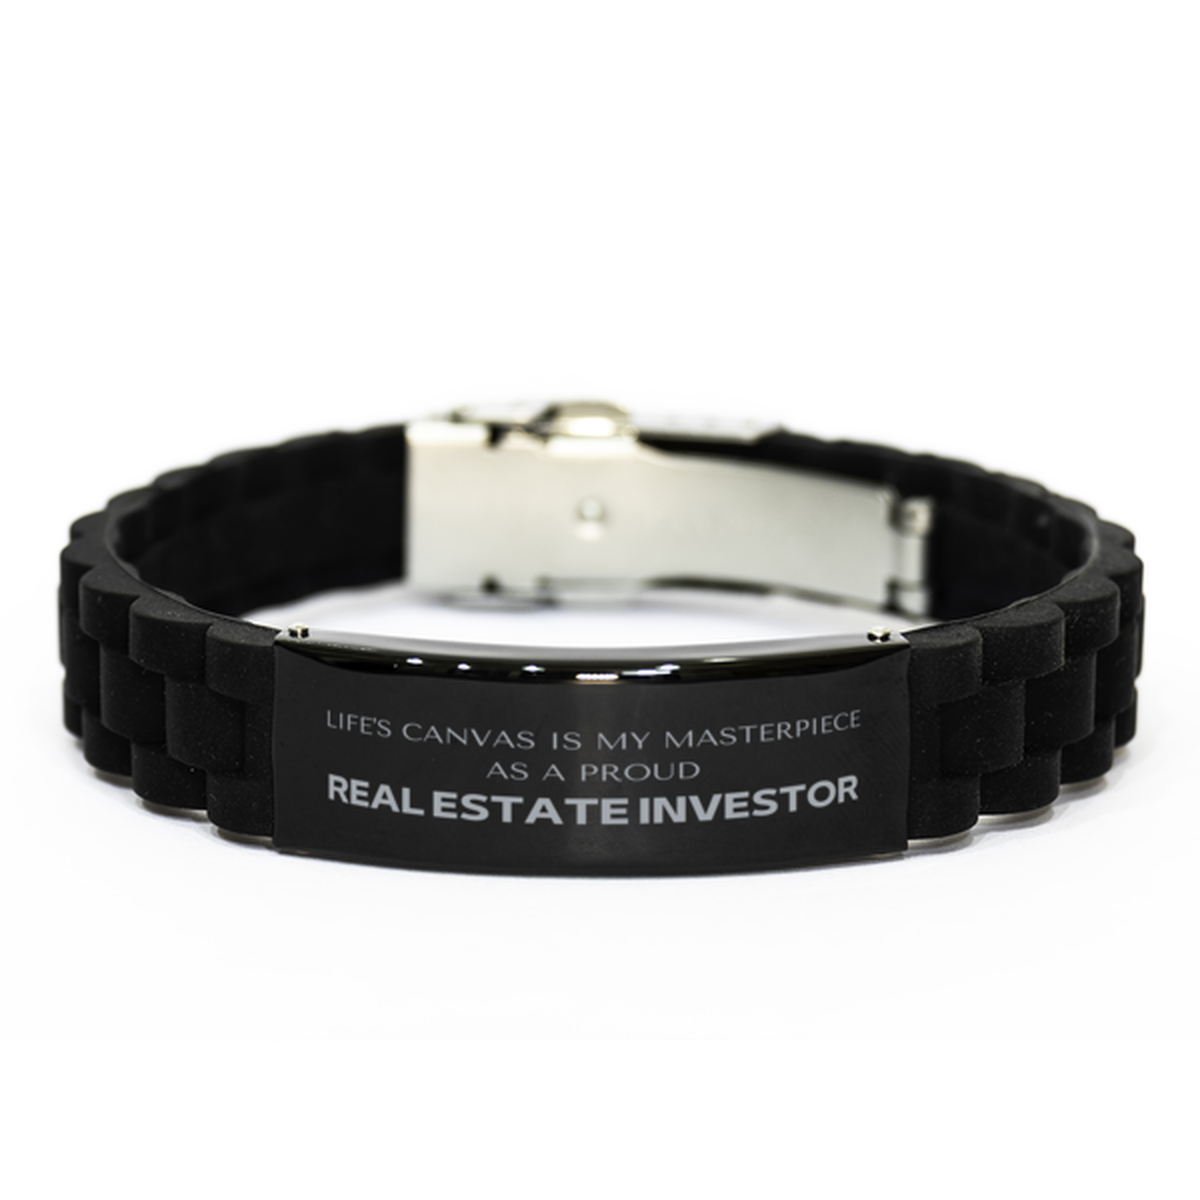 Proud Real Estate Investor Gifts, Life's canvas is my masterpiece, Epic Birthday Christmas Unique Black Glidelock Clasp Bracelet For Real Estate Investor, Coworkers, Men, Women, Friends